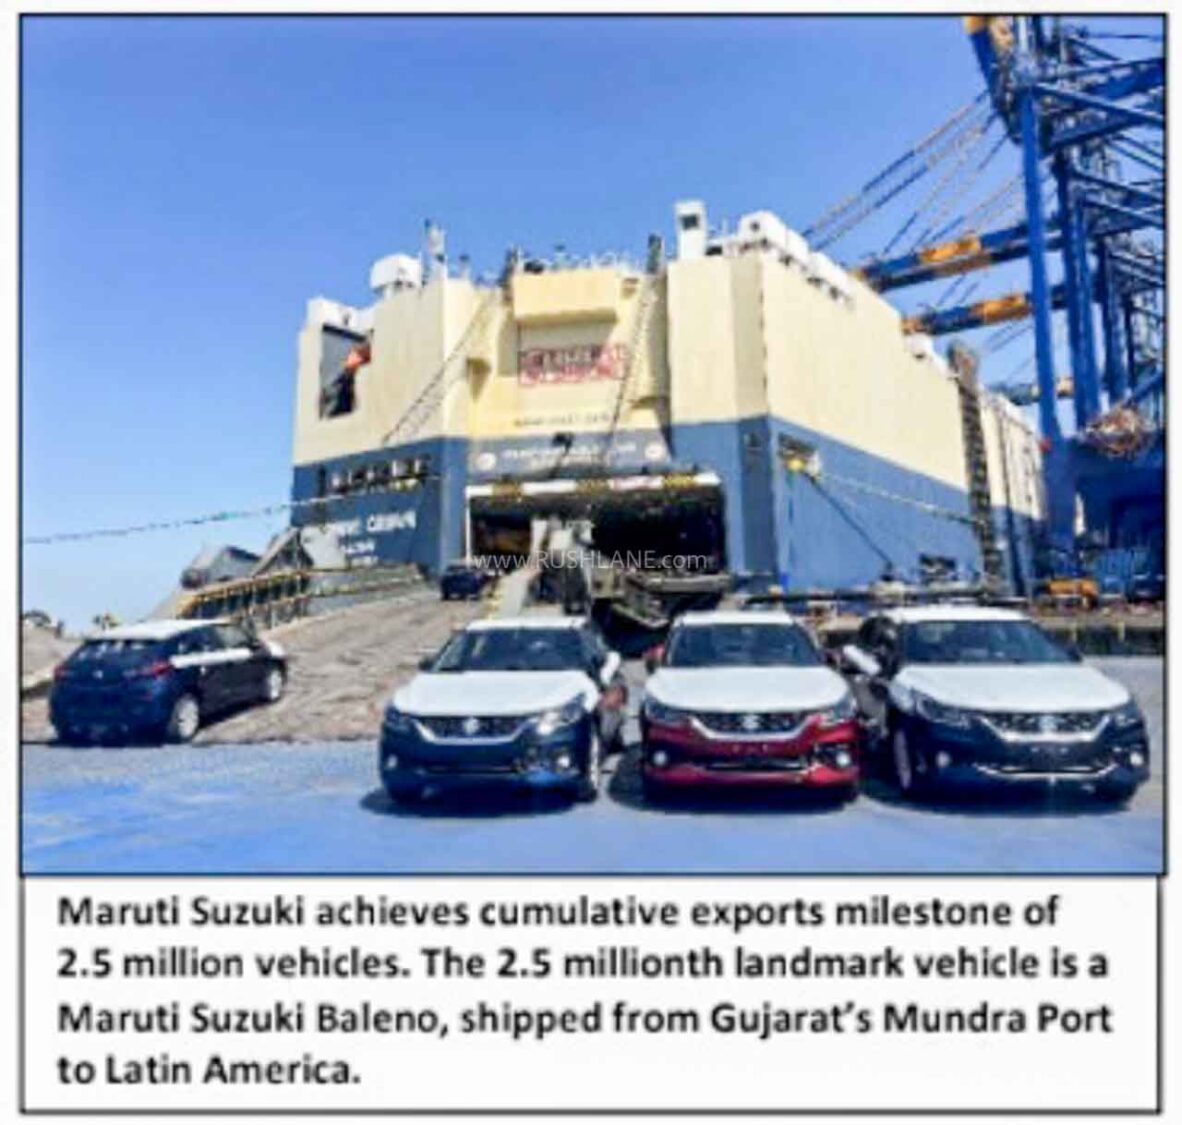 Maruti Suzuki's car now 2.5 million to be exported from India is a Baleno